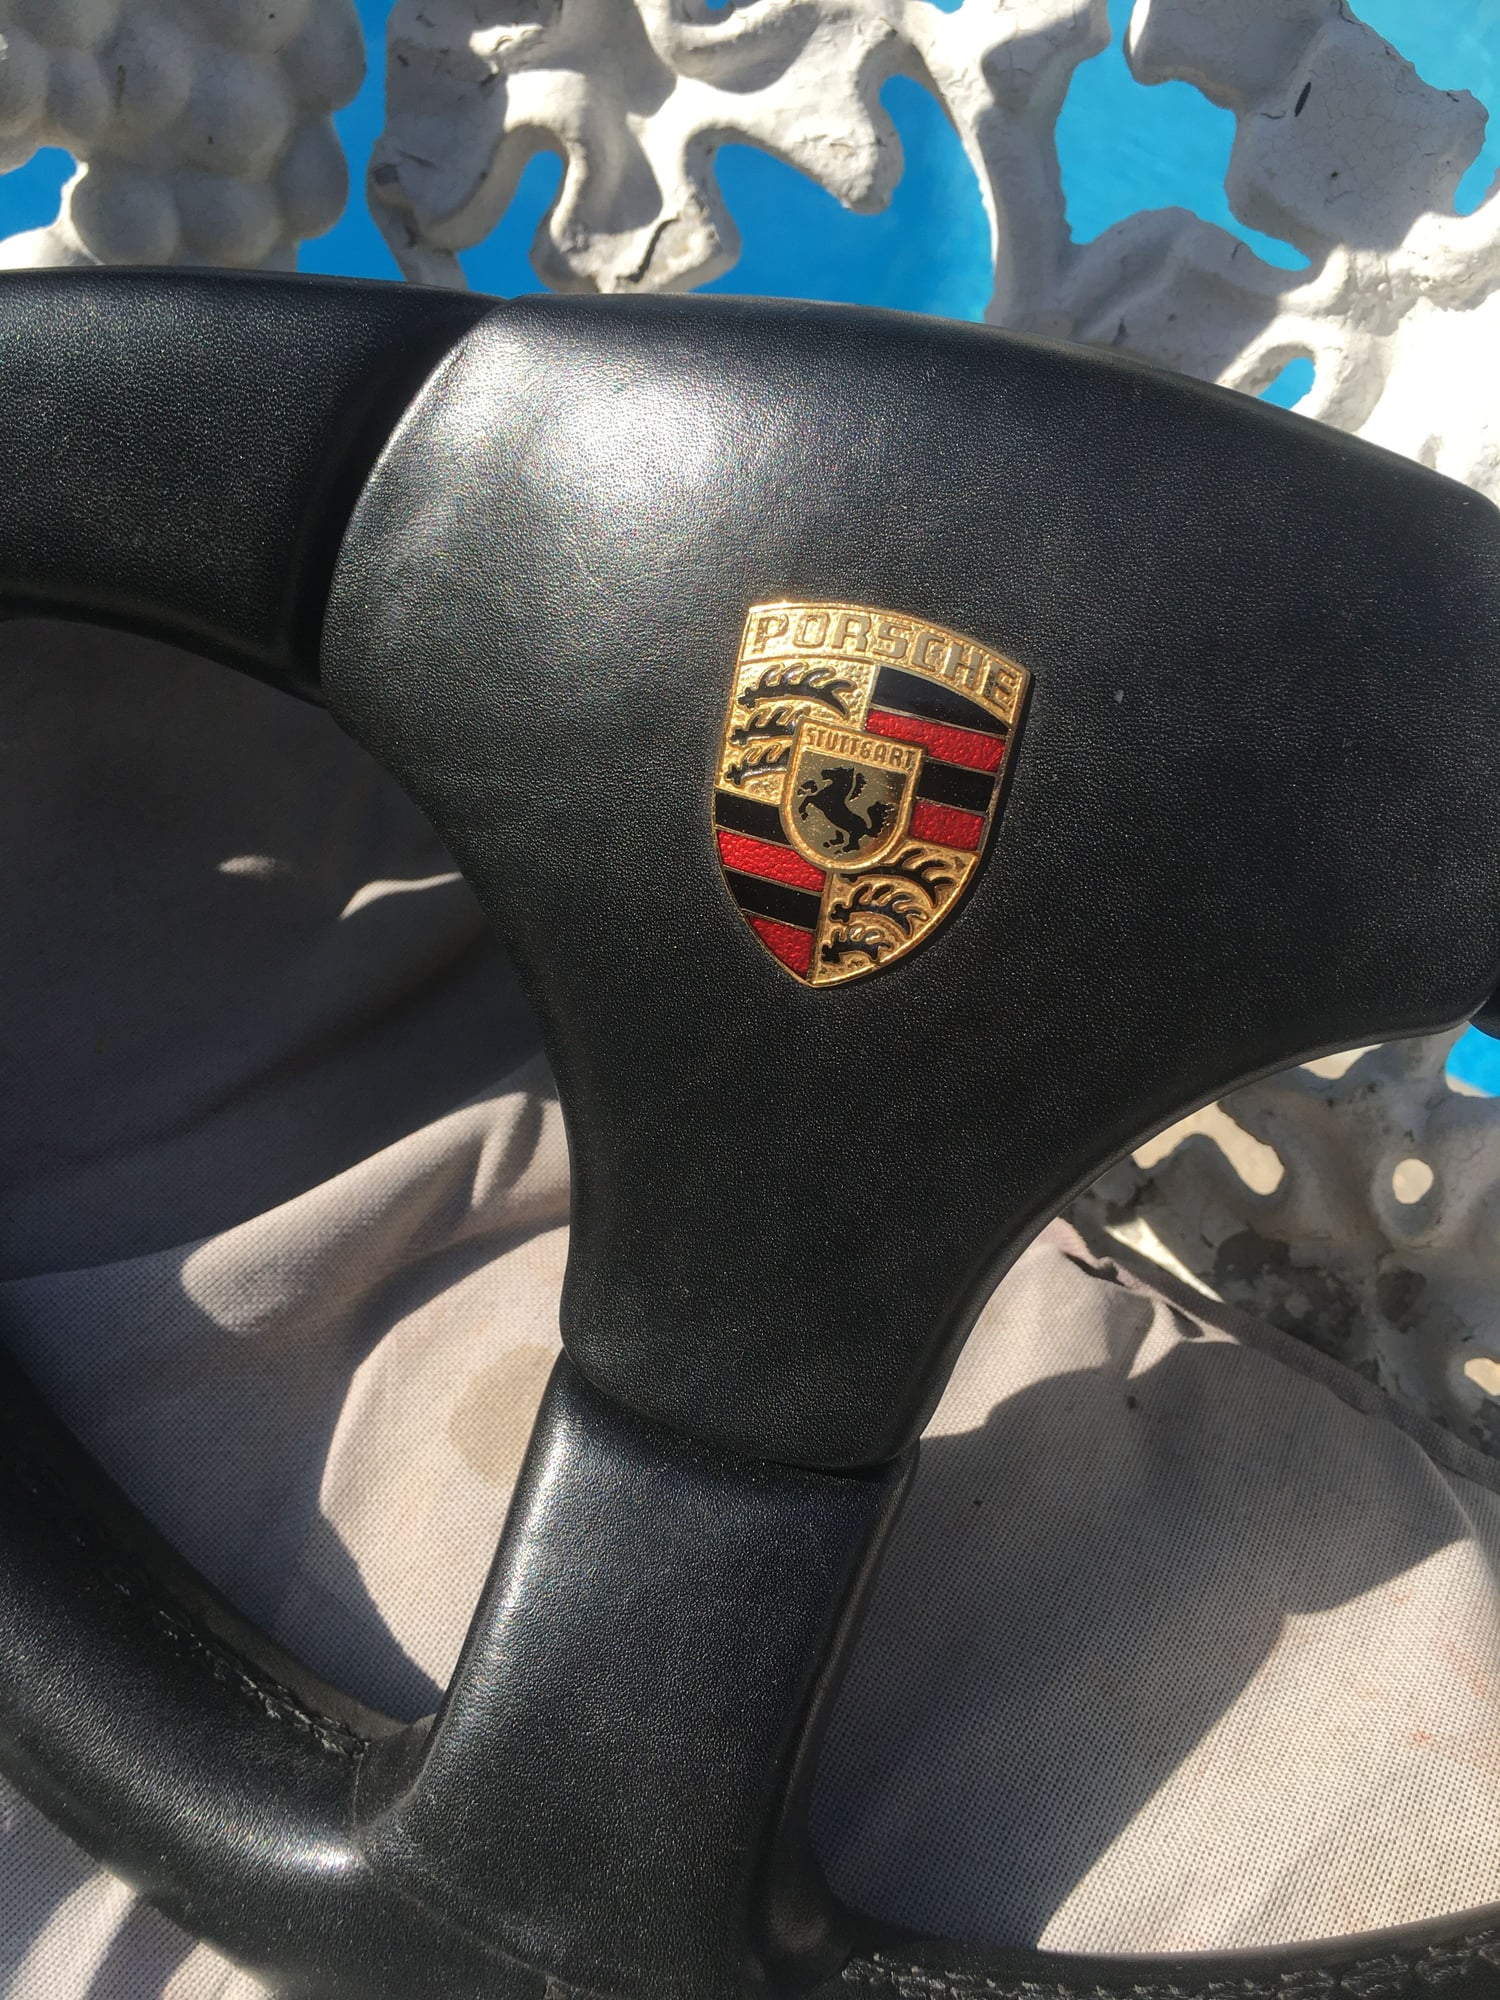 Interior/Upholstery - 930 S steering wheel $400 - Used - 1977 to 1989 Porsche 911 - Bakersfield, CA 93308, United States